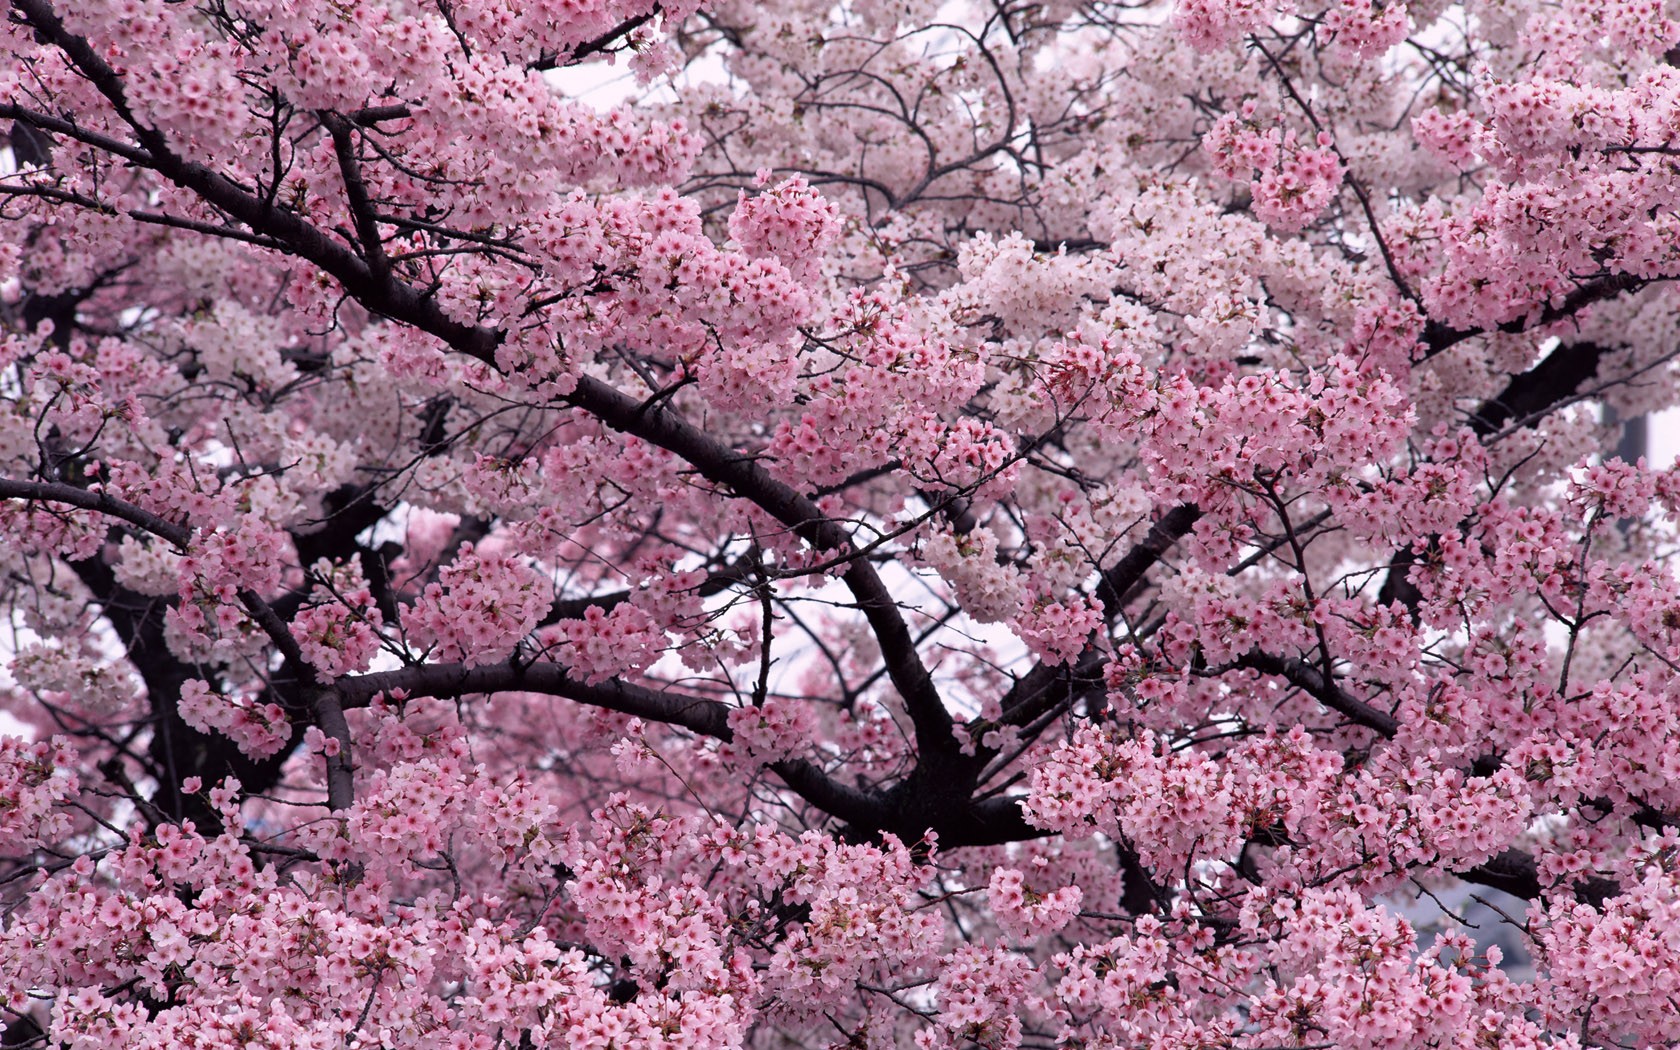 General 1680x1050 cherry blossom pink trees flowers plants